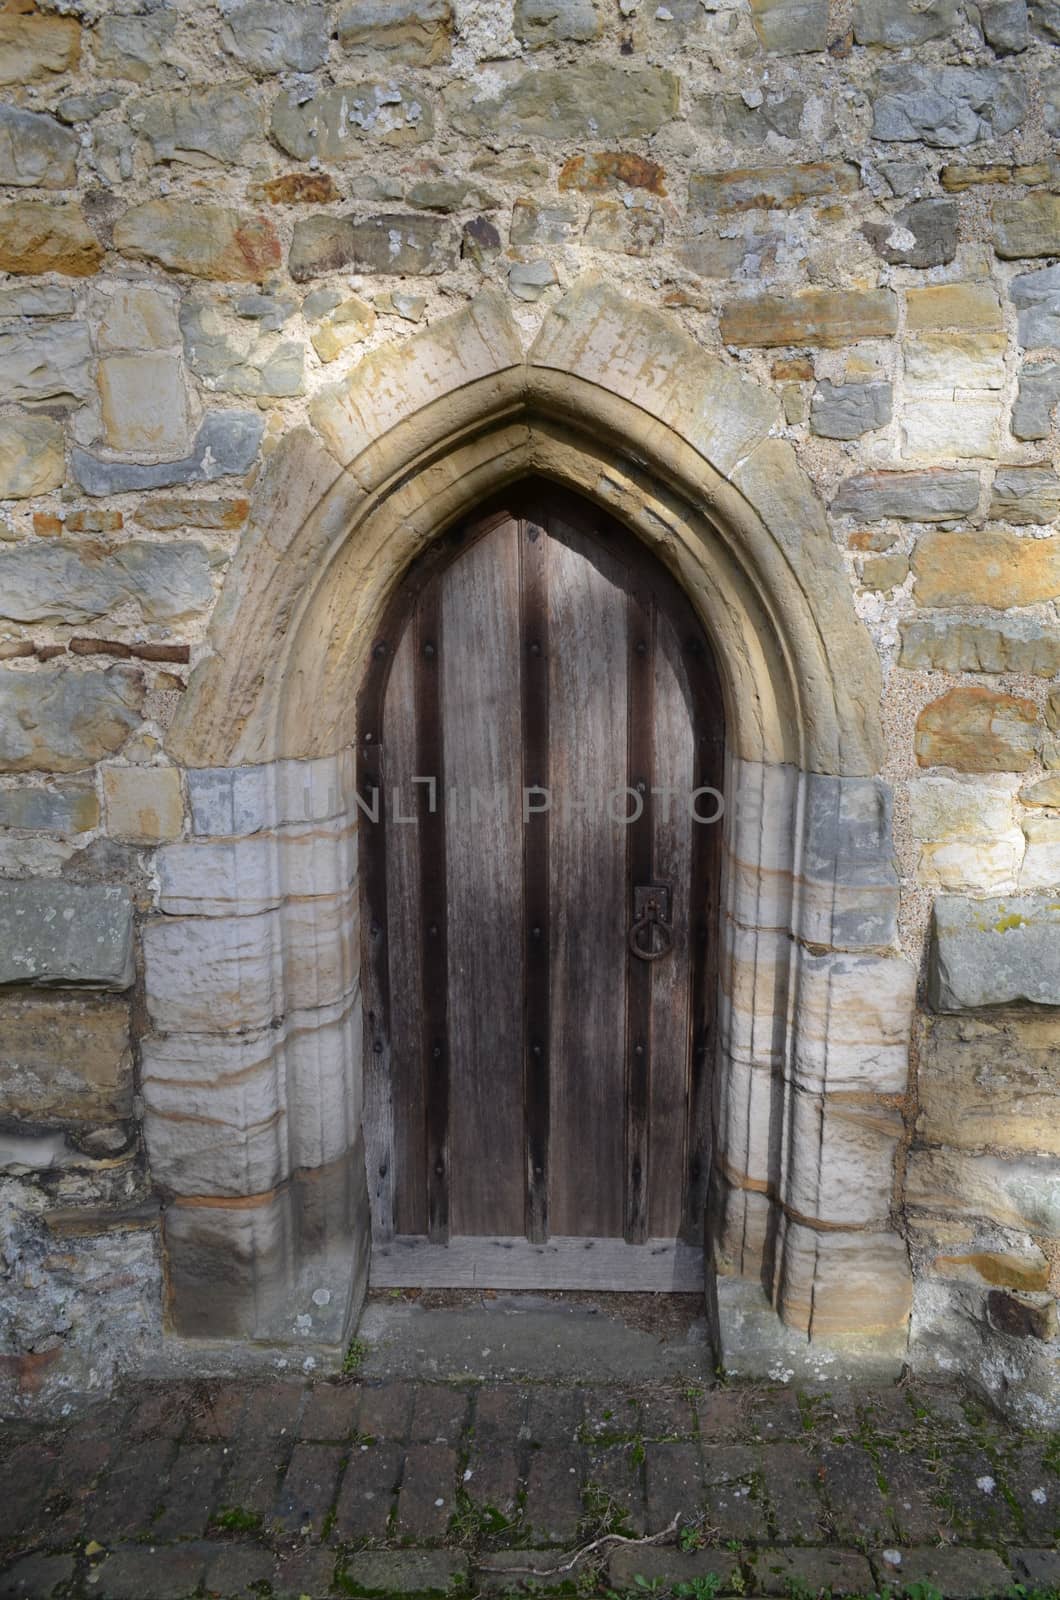 Church side door belonging to the fourteenth century church of St Peters in the small Sussex village of Ardingly.